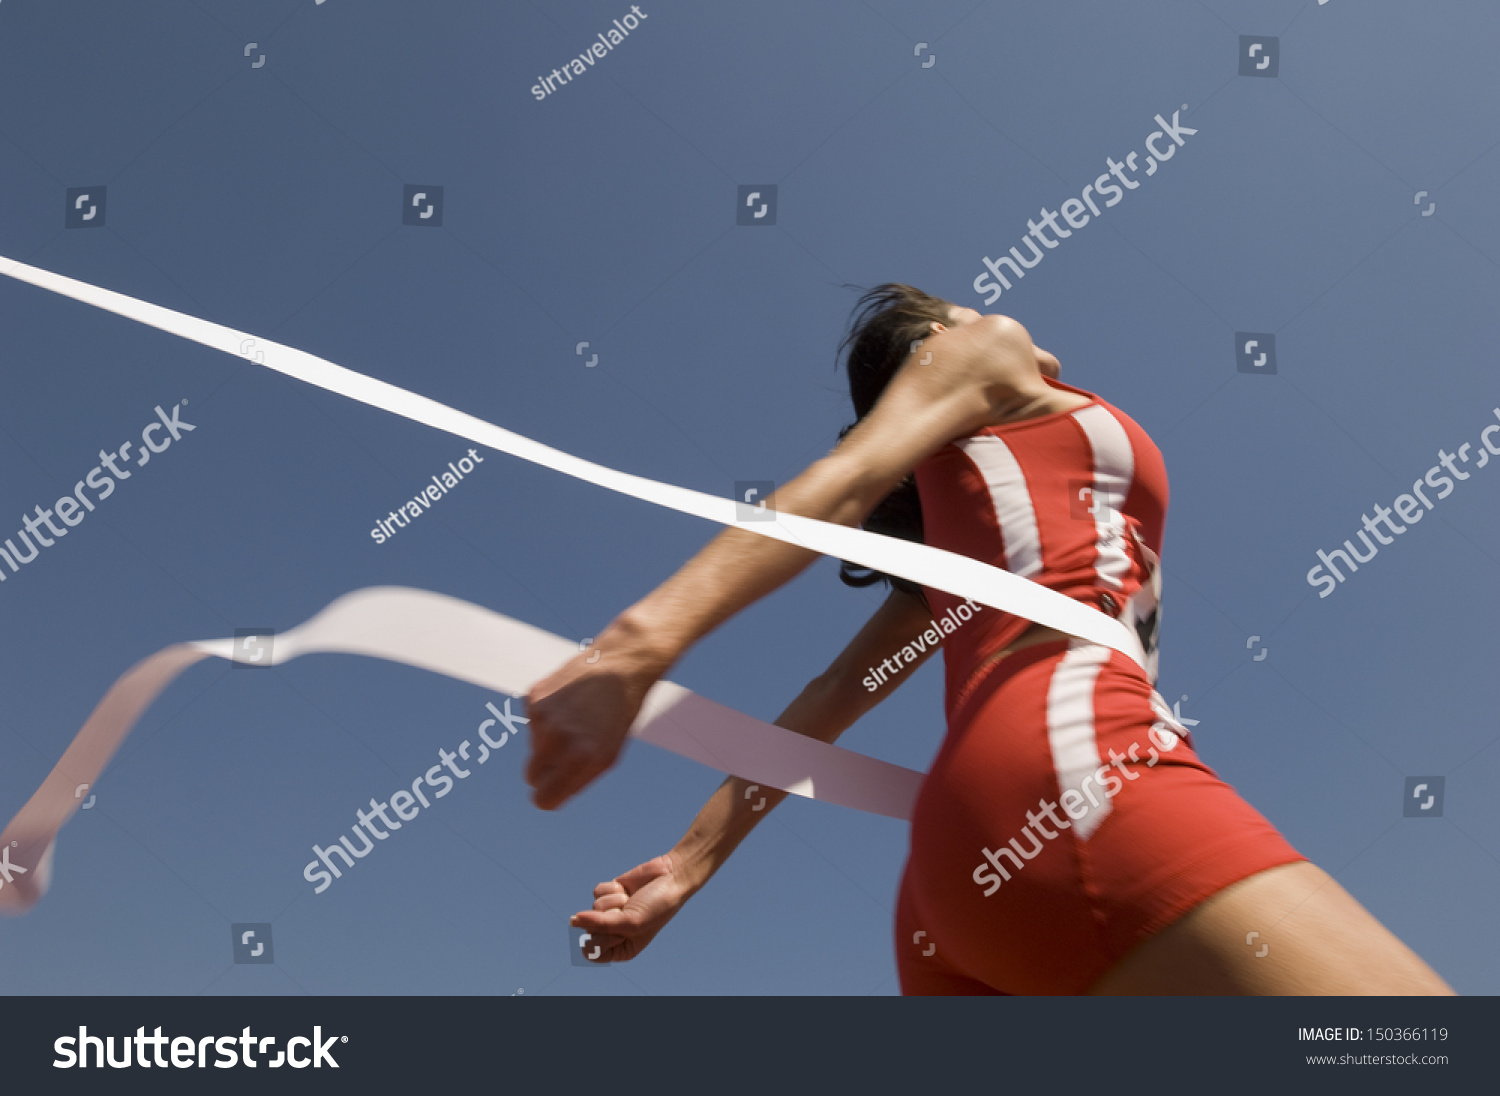 Low angle view of young female athlete crossing finish line against clear blue sky #150366119